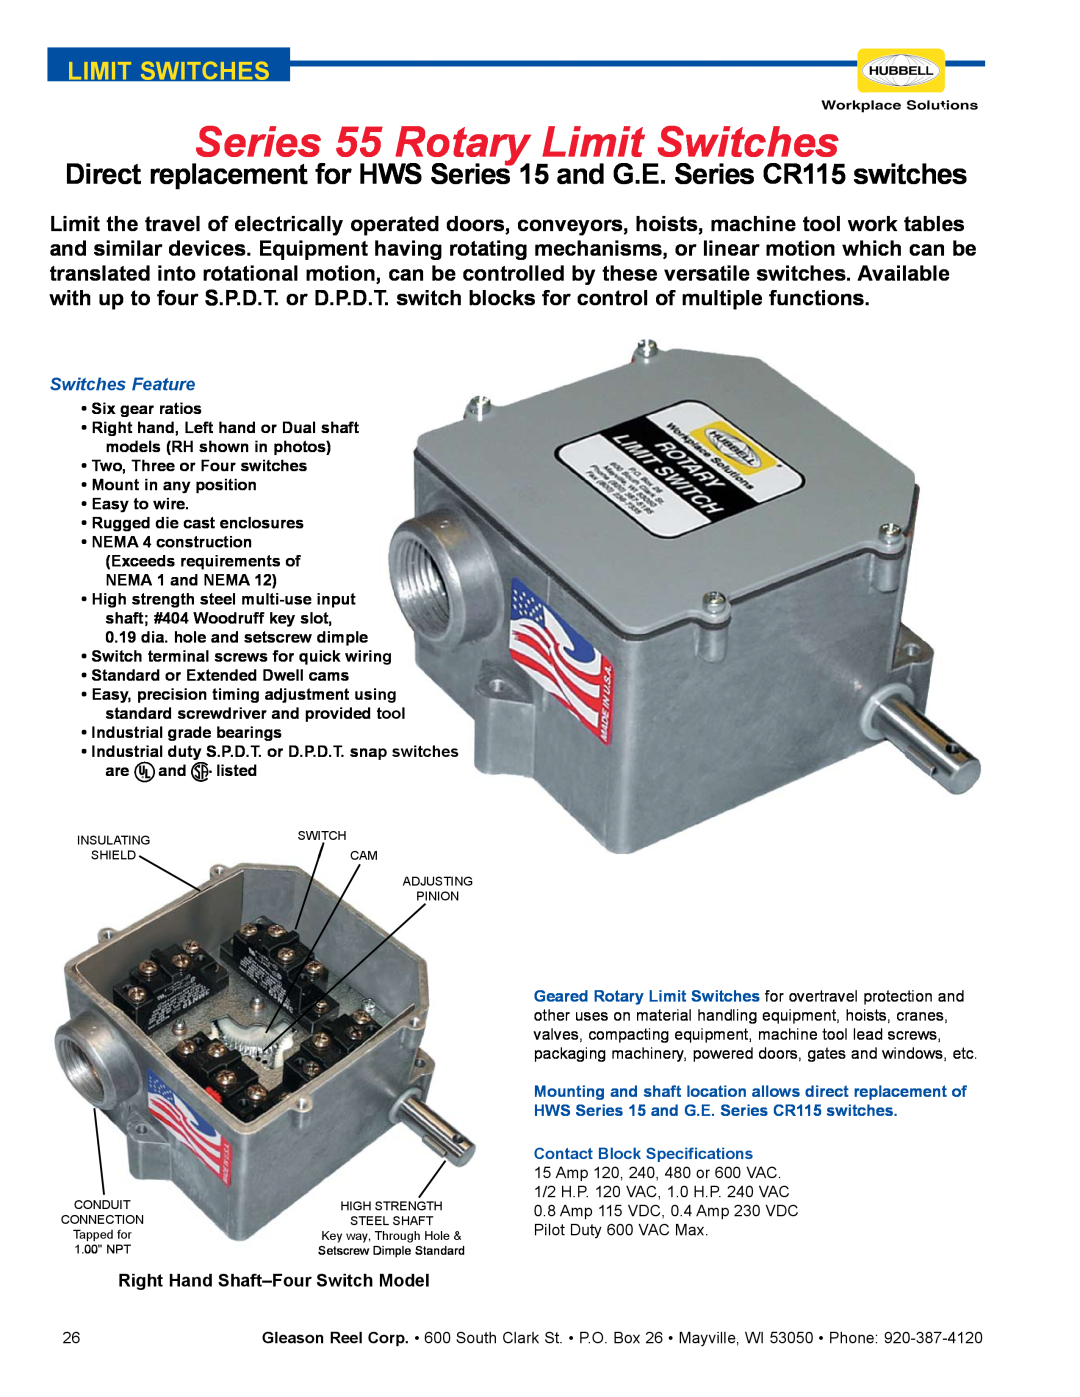 Hubbell specifications Series 55 Rotary Limit Switches, Switches Feature, Right Hand Shaft-Four Switch Model 